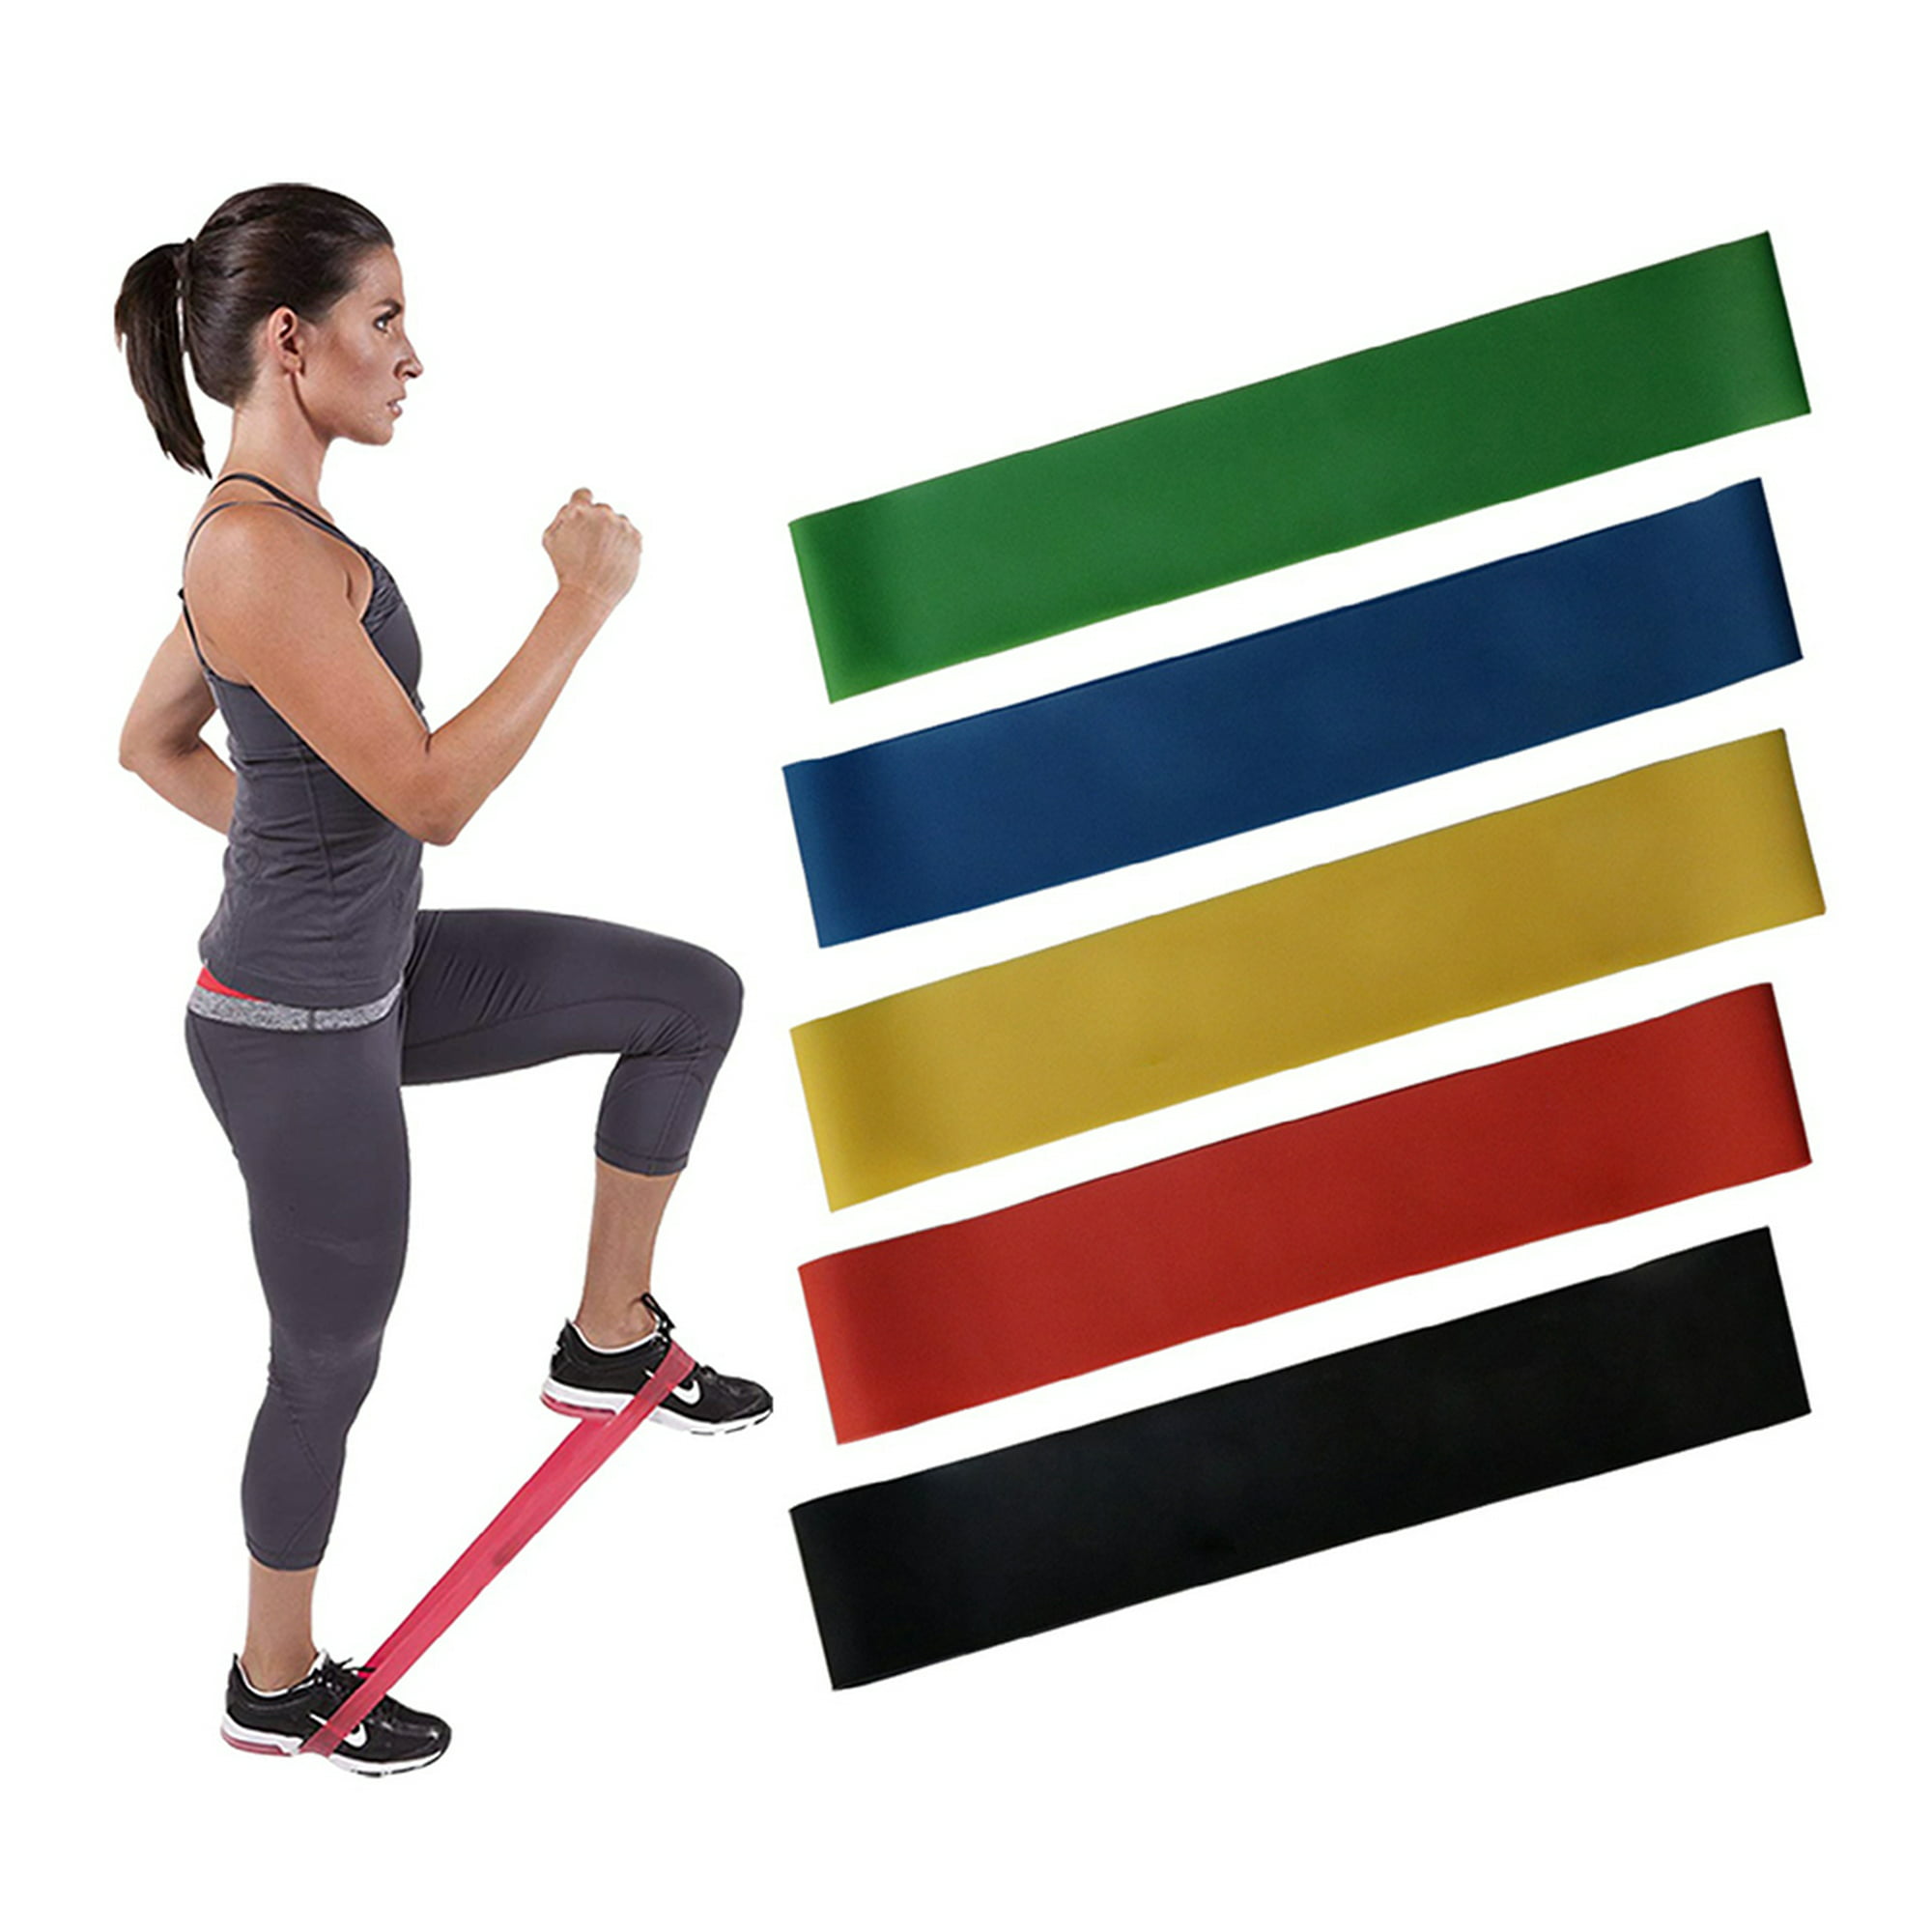 Firmou Fit Simplify Resistance Loop Exercise Bands for Home ...